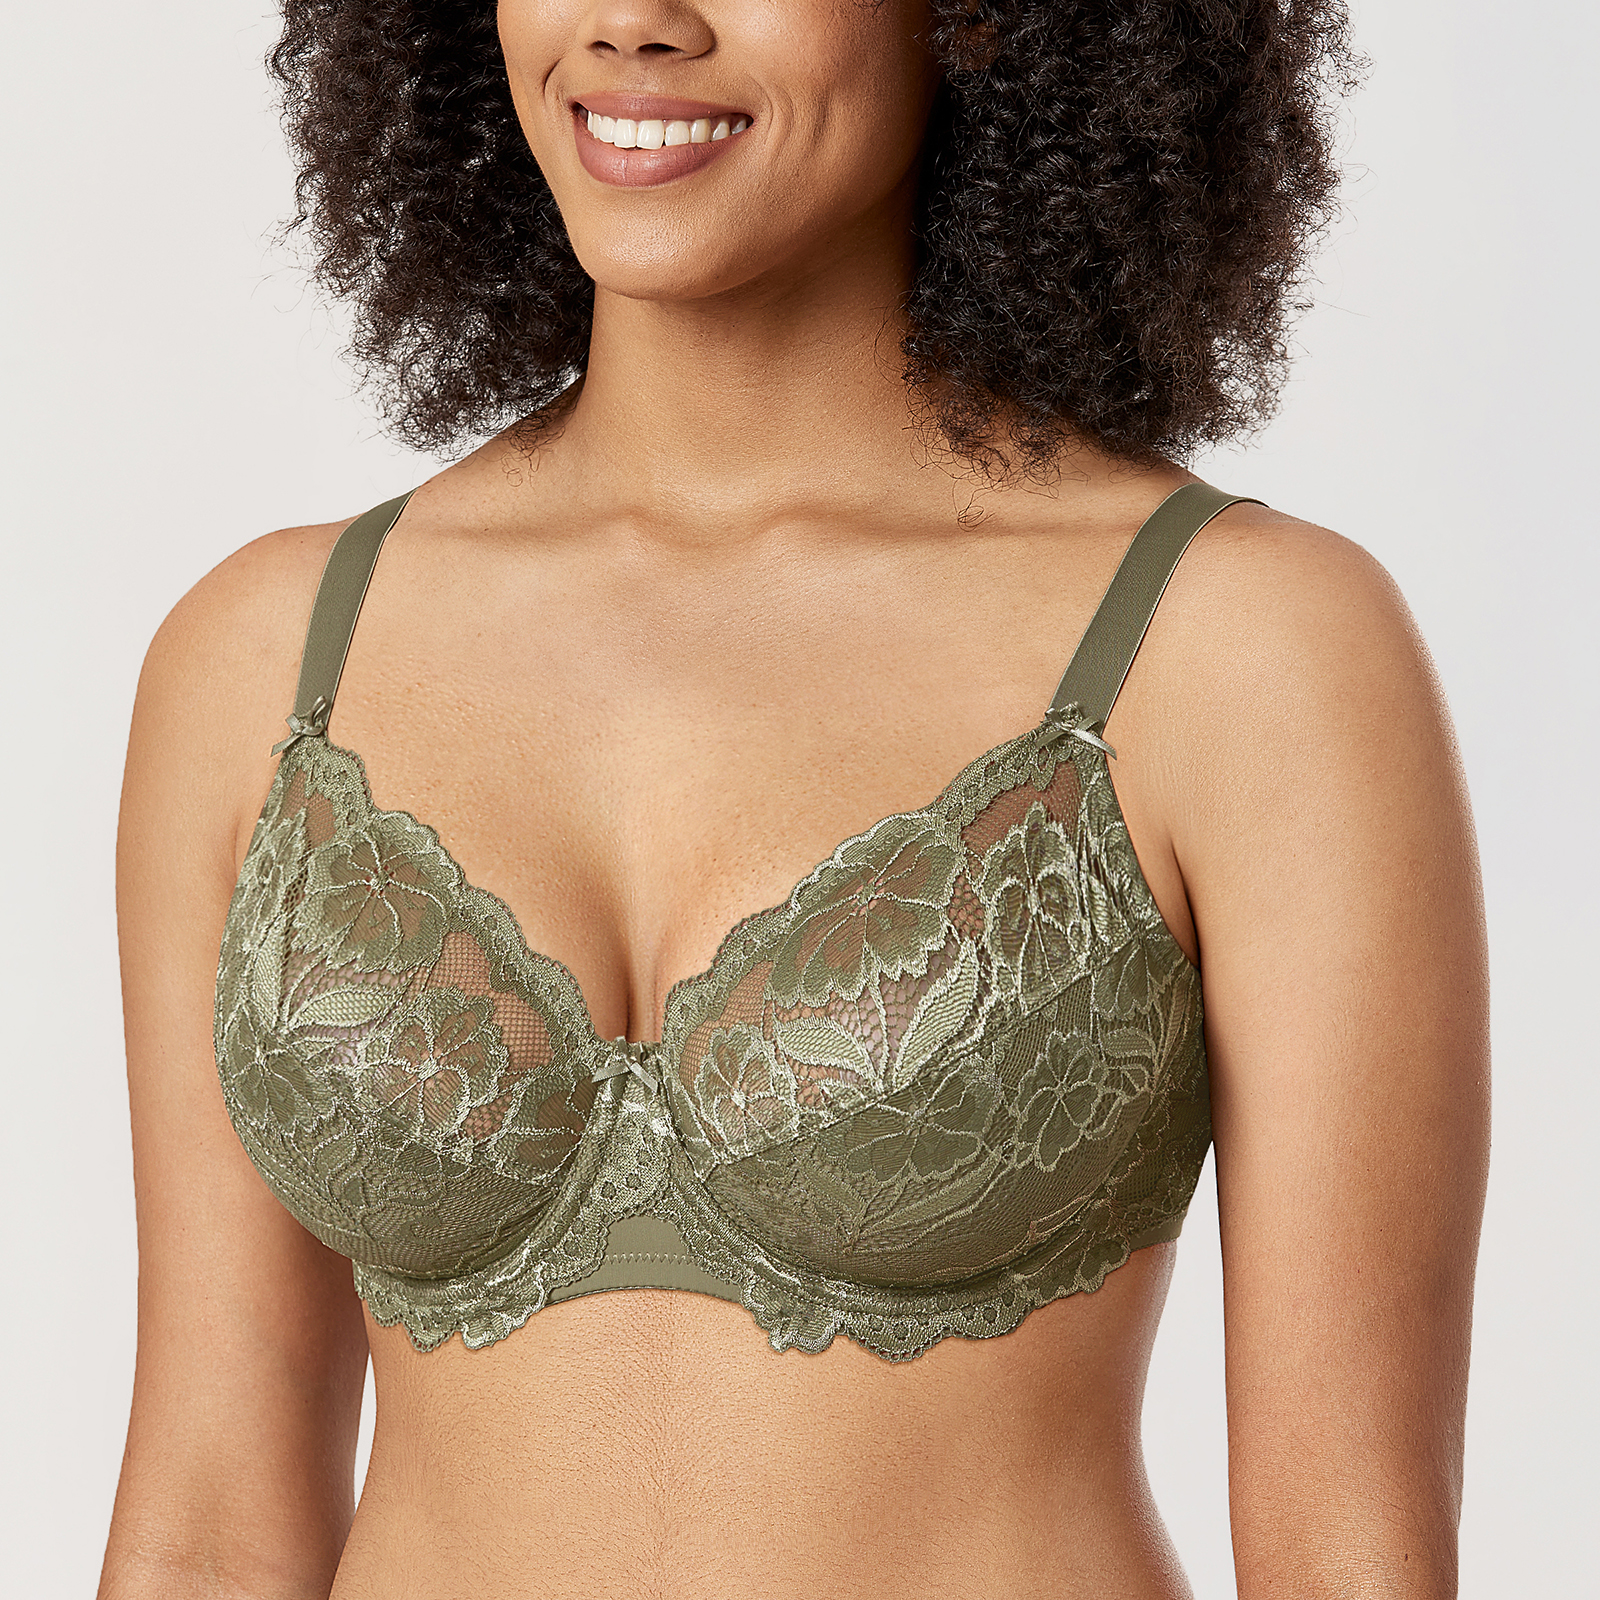 DELIMIRA Women's Plus Size up to J Cup Lace Underwire Full